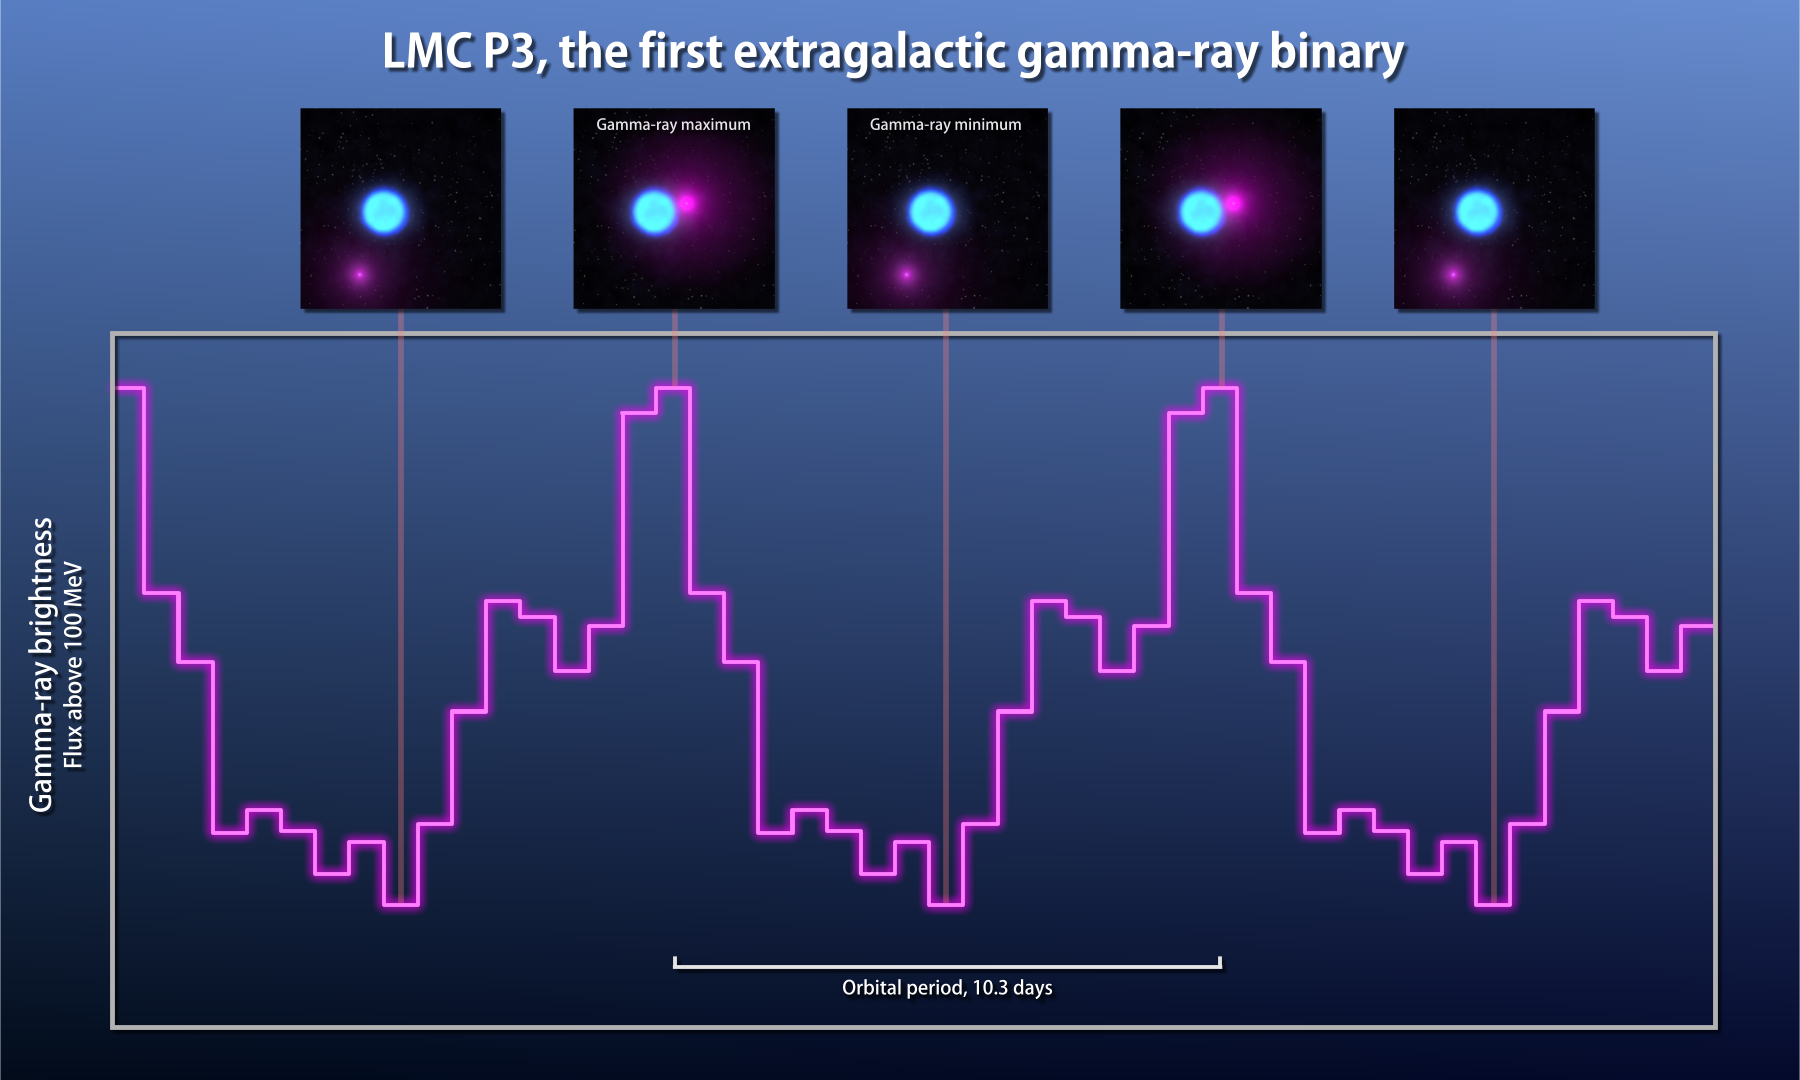 Using data from NASA's Fermi Gamma-ray Space Telescope and other facilities, scientists have found the first gamma-ray binary in another galaxy and the most luminous one ever seen. The dual-star system, dubbed LMC P3, contains a massive star and a crushed stellar core that interact to produce a cyclic flood of gamma rays, the highest-energy form of light. 

Gamma-ray binaries are rare -- only six are known in our own galaxy, and one remains undetected by Fermi. The systems are prized because their gamma-ray output changes significantly during each orbit and sometimes over longer time scales. This variation lets astronomers study many of the emission processes common to other gamma-ray sources in unique detail. 

The systems contain either a neutron star or a black hole and radiate most of their energy in the form of gamma rays. Remarkably, LMC P3 is the most luminous such system known in gamma rays, X-rays, radio waves and visible light, and it's only the second one discovered with Fermi. 

LMC P3 lies within a supernova remnant located in the Large Magellanic Cloud (LMC), a small nearby galaxy about 163,000 light-years away. In 2012, scientists using NASA's Chandra X-ray Observatory found a strong X-ray source within the remnant and showed that it was orbiting a hot, young star many times the sun's mass. The researchers concluded the compact object was either a neutron star or a black hole and classified the system as a high-mass X-ray binary (HMXB).

In 2015, a team led by Robin Corbet at NASA's Goddard Space Flight Center began looking for new gamma-ray binaries in Fermi data by searching for the periodic changes characteristic of these systems. The scientists discovered a 10.3-day cyclic change centered near one of several gamma-ray point sources recently identified in the LMC. One of them, called P3, was not linked to objects seen at any other wavelengths but was located near the HMXB. Were they the same object? 

Observations from NASA's Swift satellite clearly reveal the same 10.3-day cycle seen in gamma rays by Fermi. They also indicate that the brightest X-ray emission occurs opposite the gamma-ray peak, so when one reaches maximum the other is at minimum. Radio data exhibit the same period and out-of-phase relationship with the gamma-ray peak, confirming that LMC P3 is indeed the same system investigated by Chandra. 

Prior to Fermi's launch, gamma-ray binaries were expected to be more numerous than they've turned out to be. It's a puzzle because hundreds of HMXBs are cataloged, and all of them are thought to have originated as gamma-ray binaries following the supernova that formed the compact object. Its possible gamma-ray binaries may form only from neutron stars born with the fastest spins, which would enhance their ability to produce gamma rays.